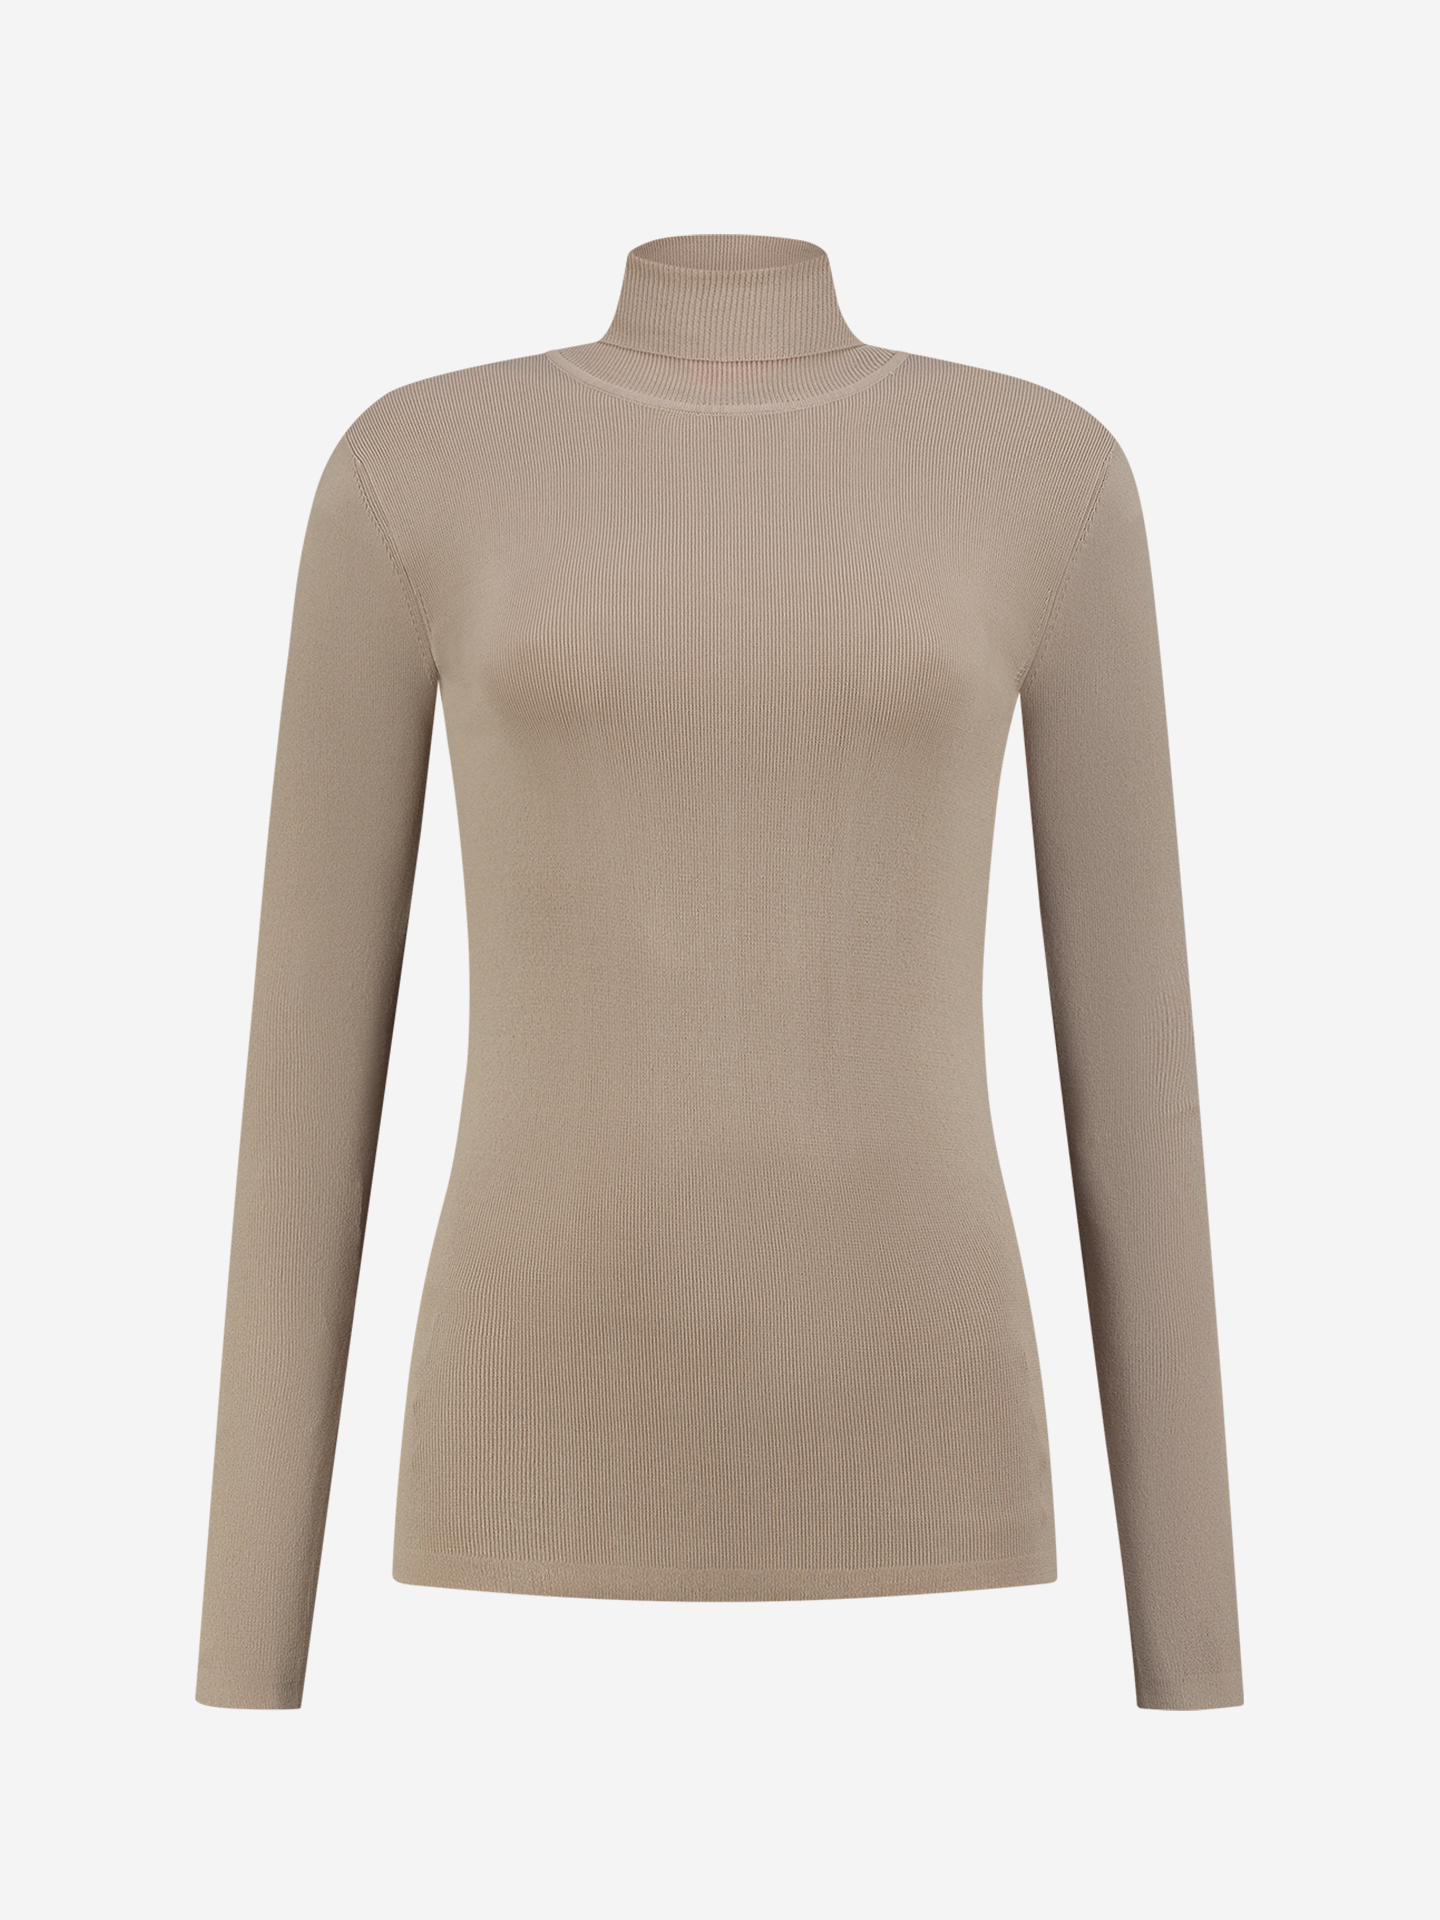 Fitted top with turtle neck